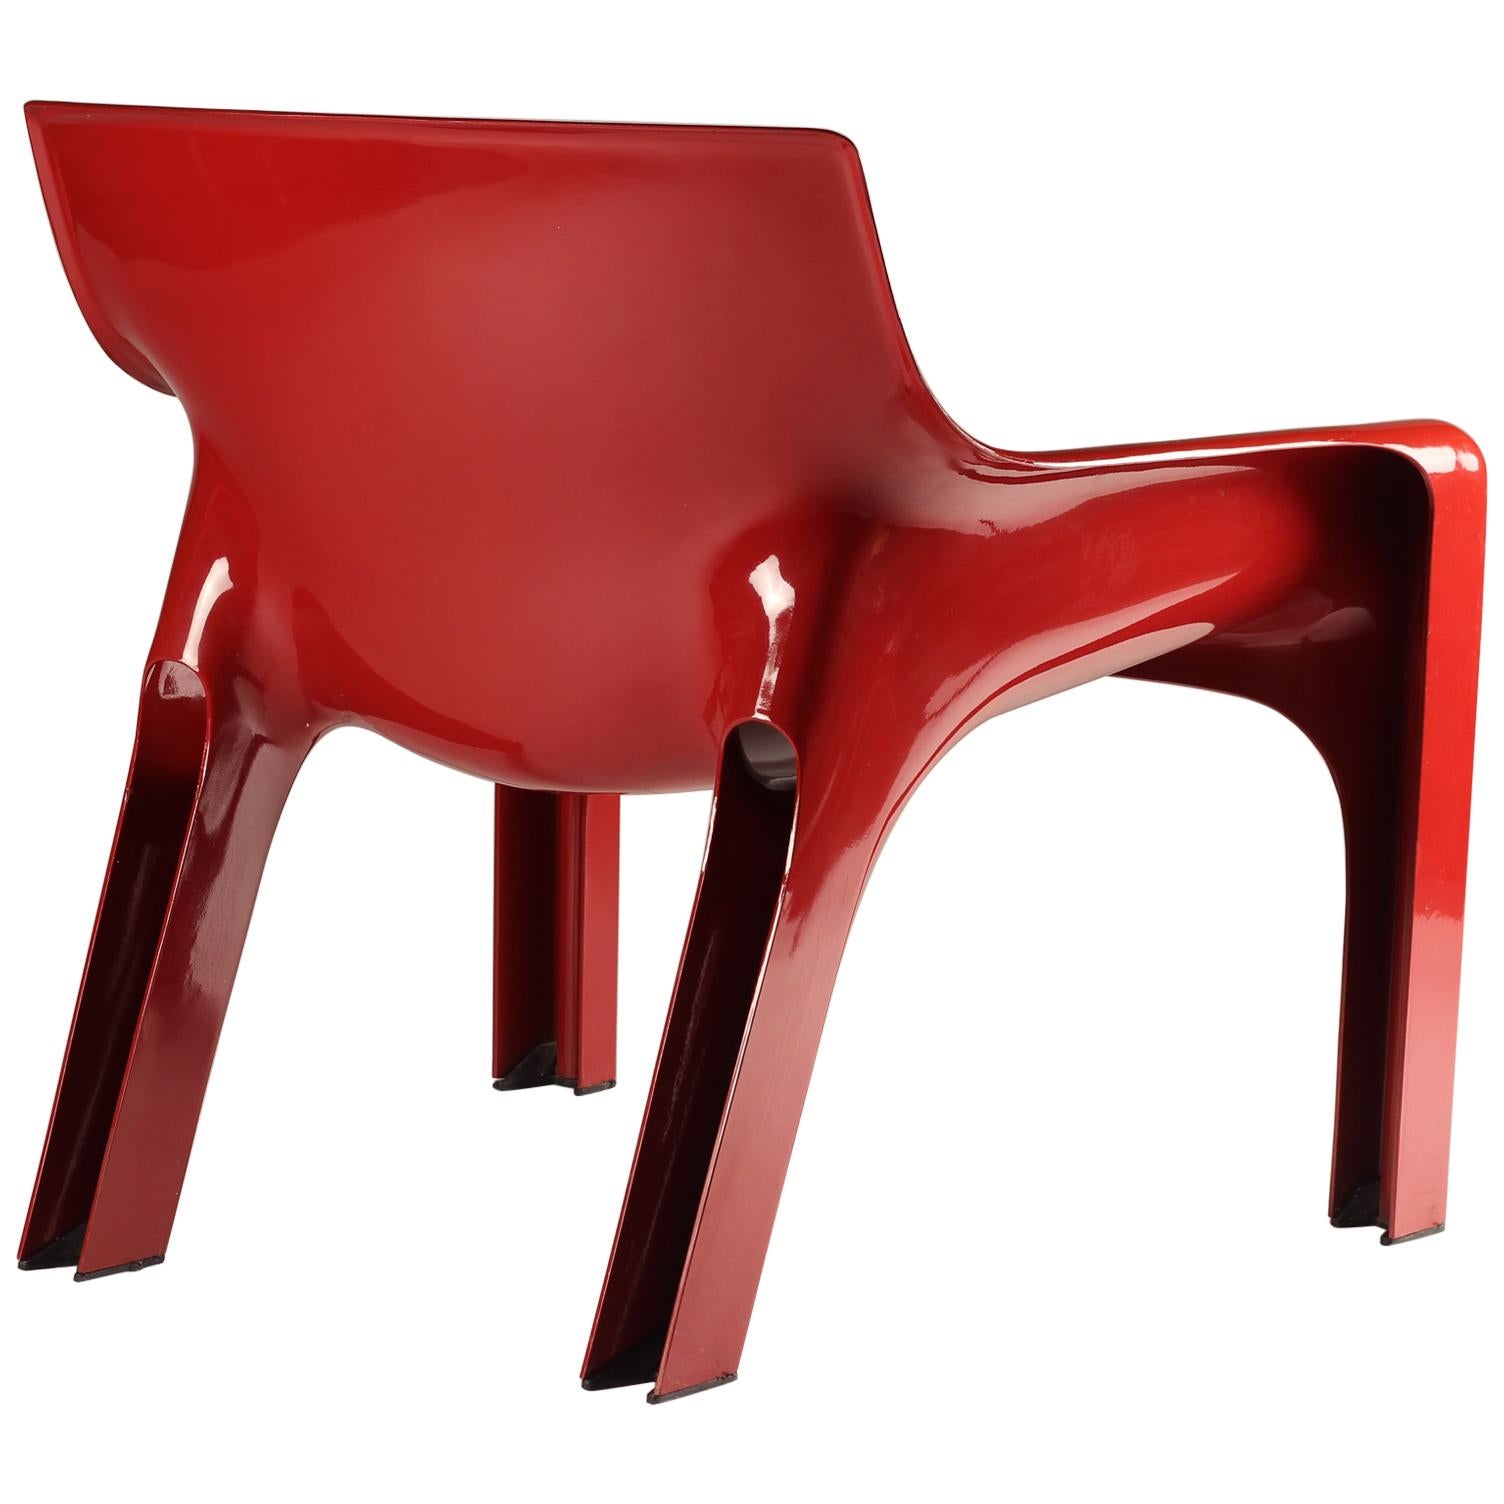 Red Original Lounge Chair Vicario Designed by Vico Magistretti Made by Artemide